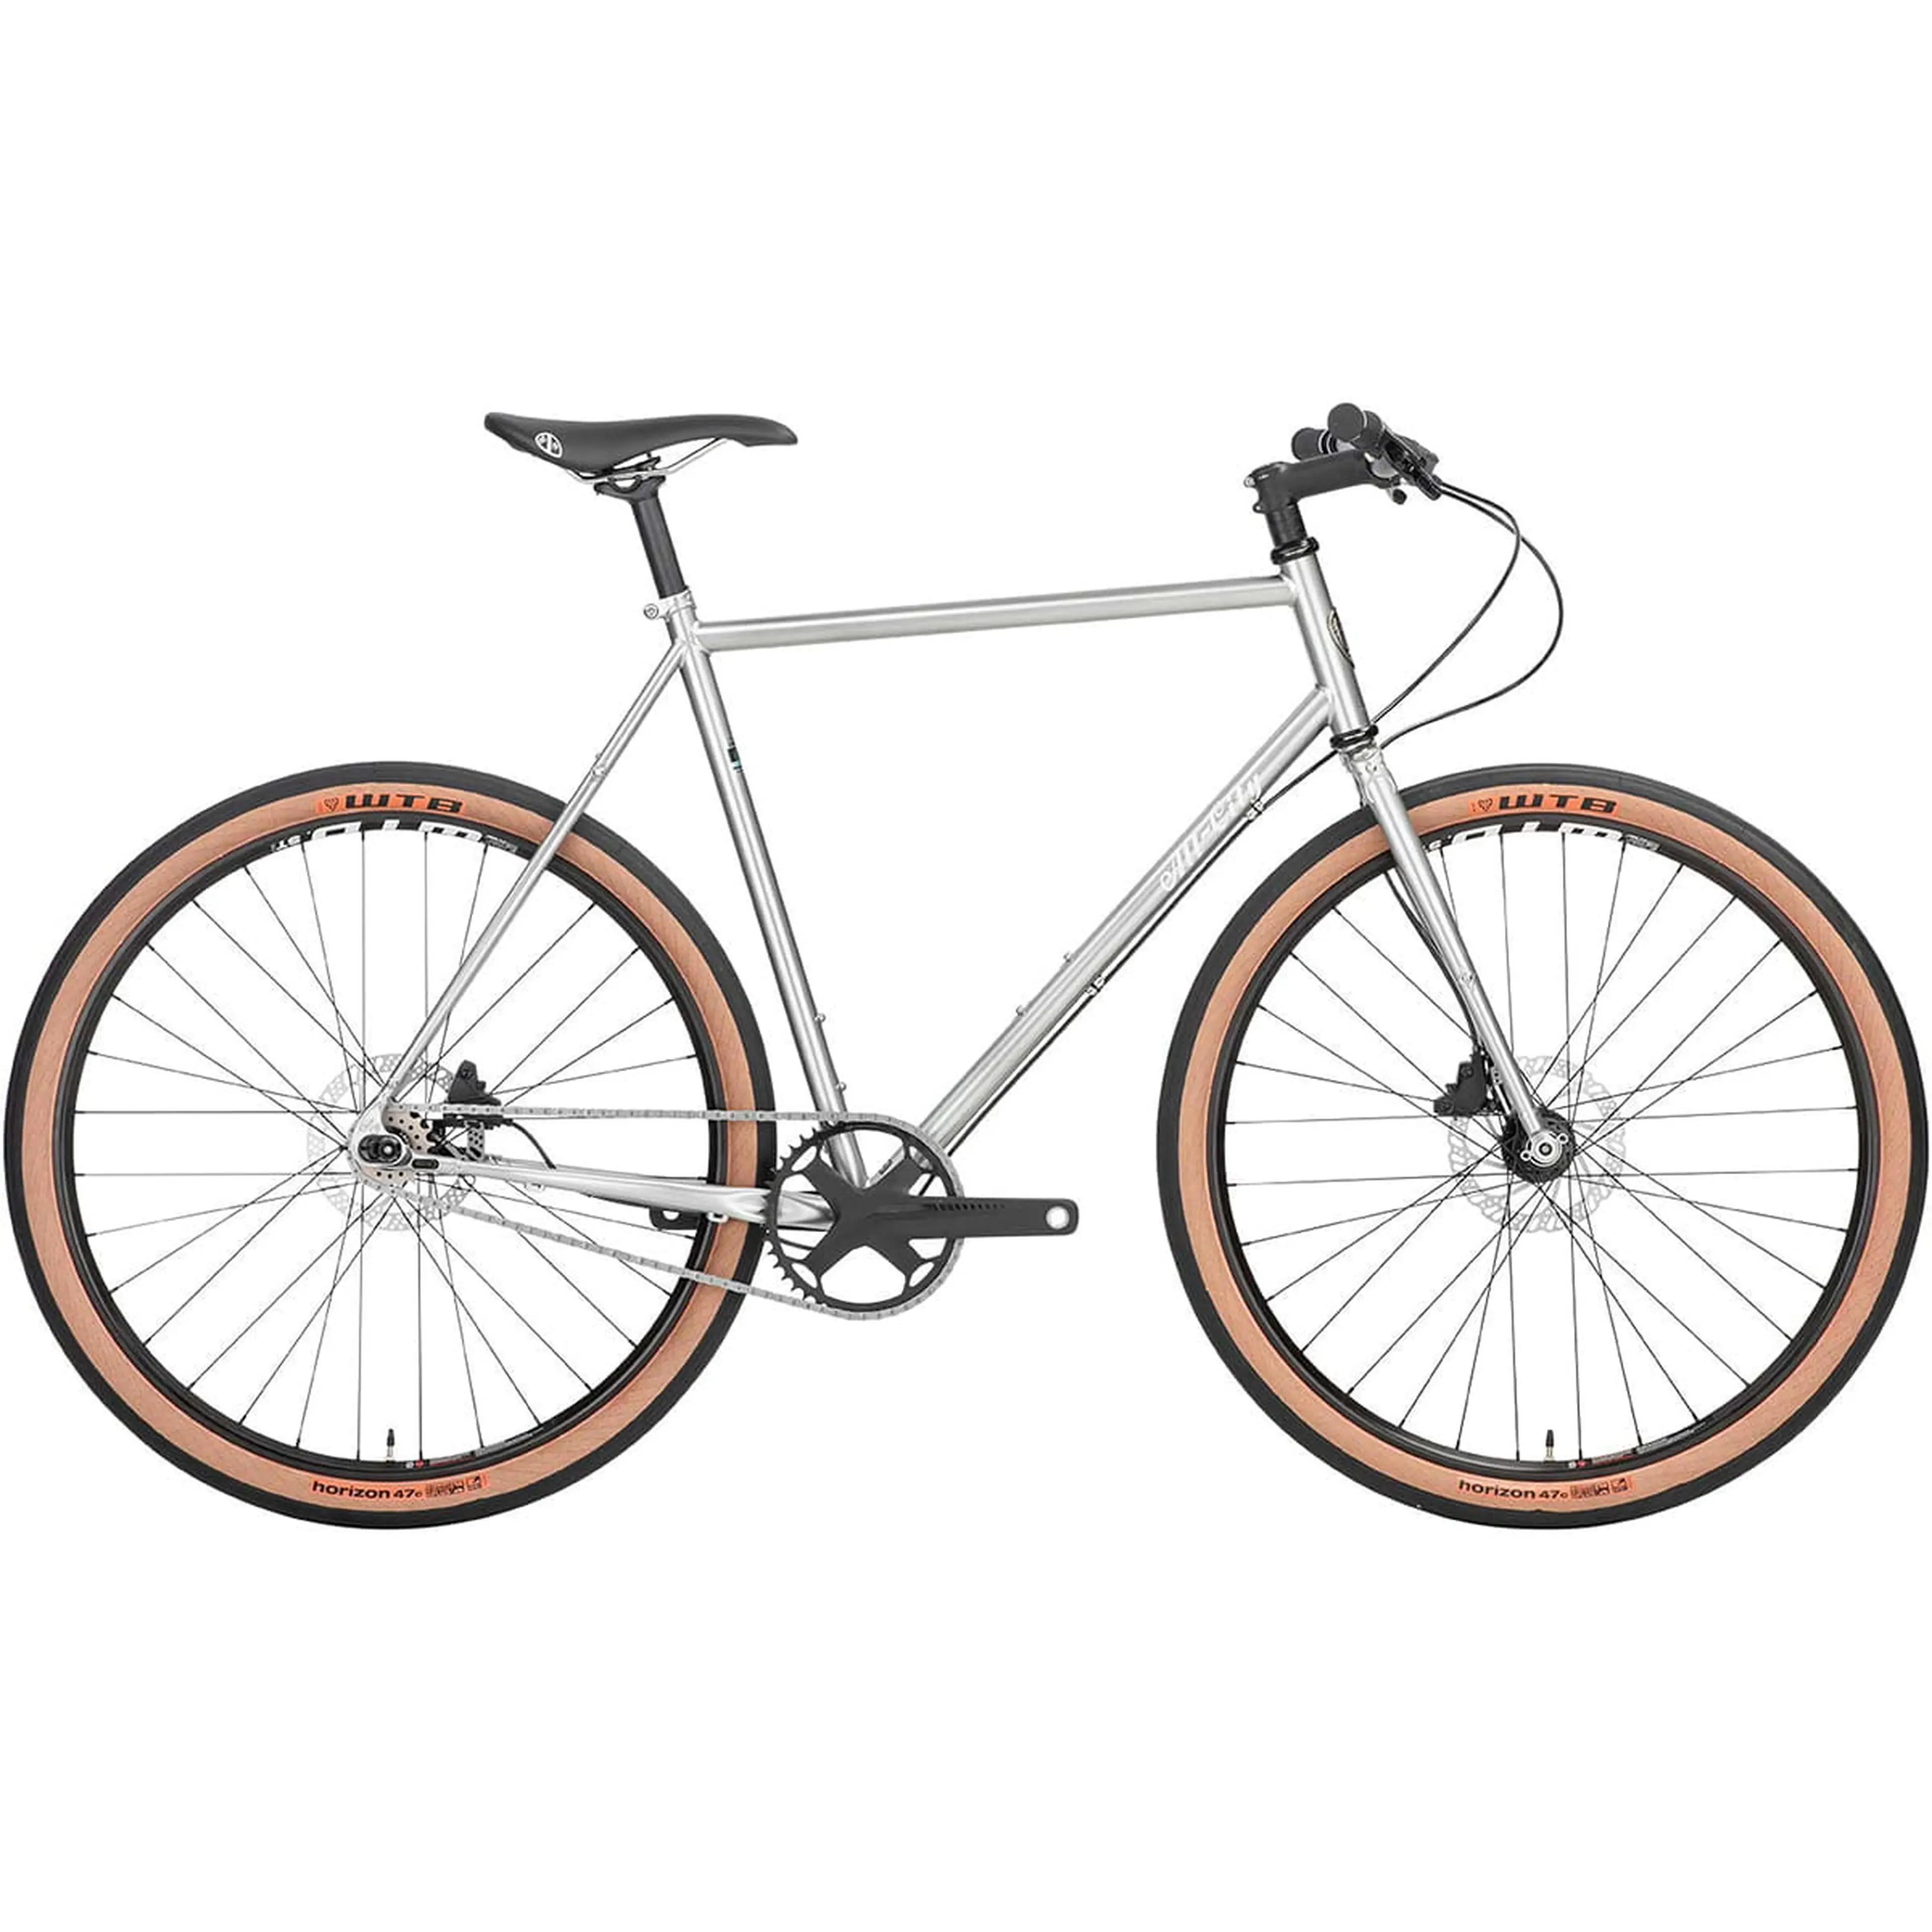 1. All City Suoer Professional Single Speed